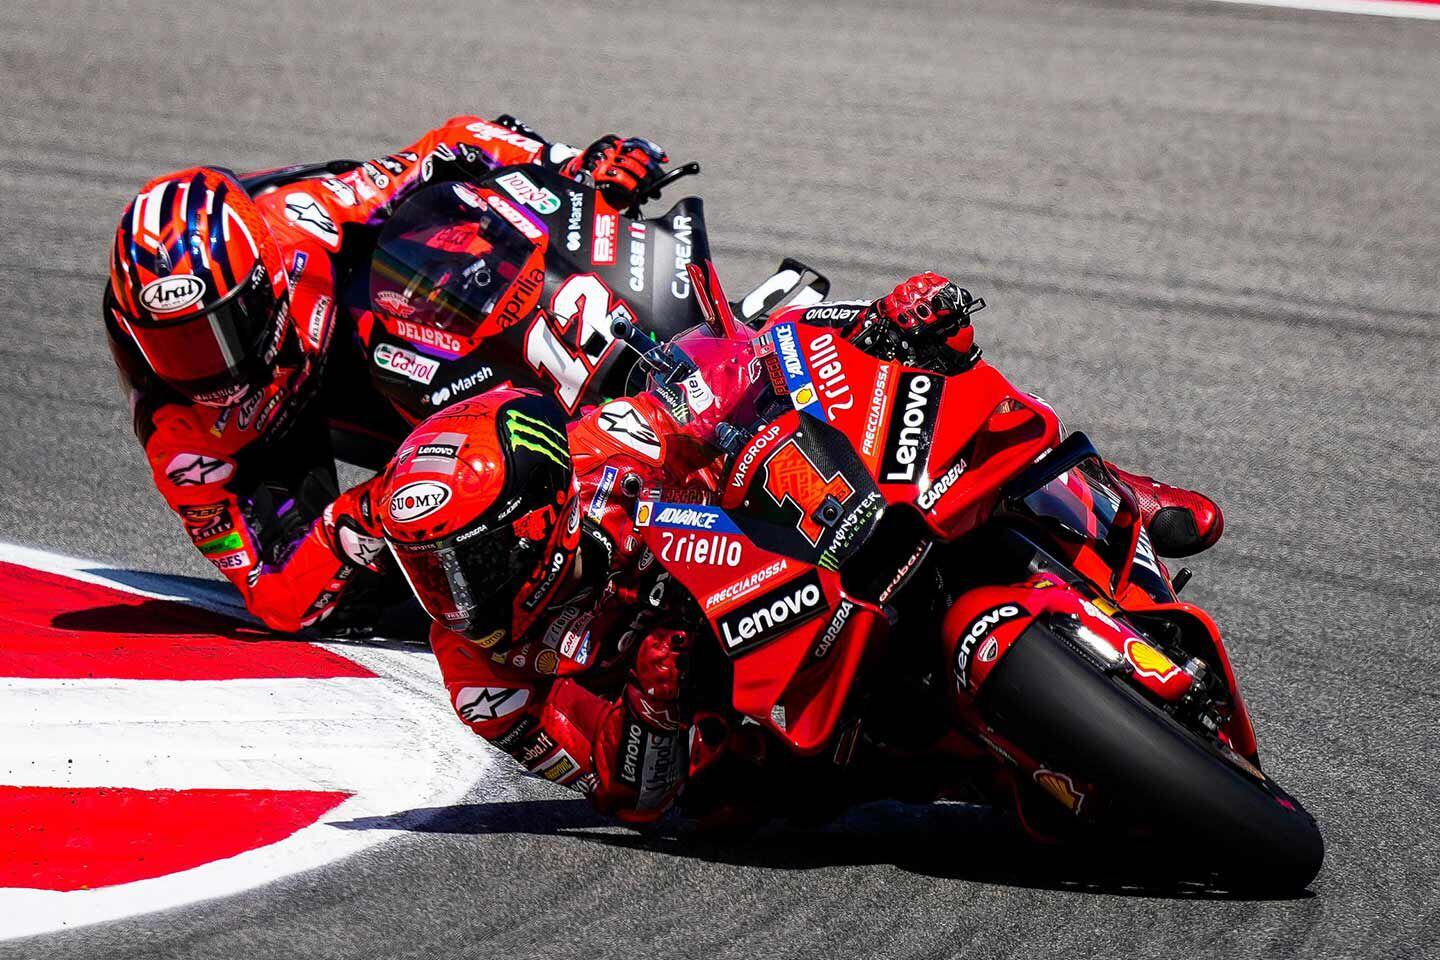 The opening round of the 2023 MotoGP Championship kicked off in Portimão. Saturday’s sprint race and Sunday’s GP ended the same way: Francesco Bagnaia in front.